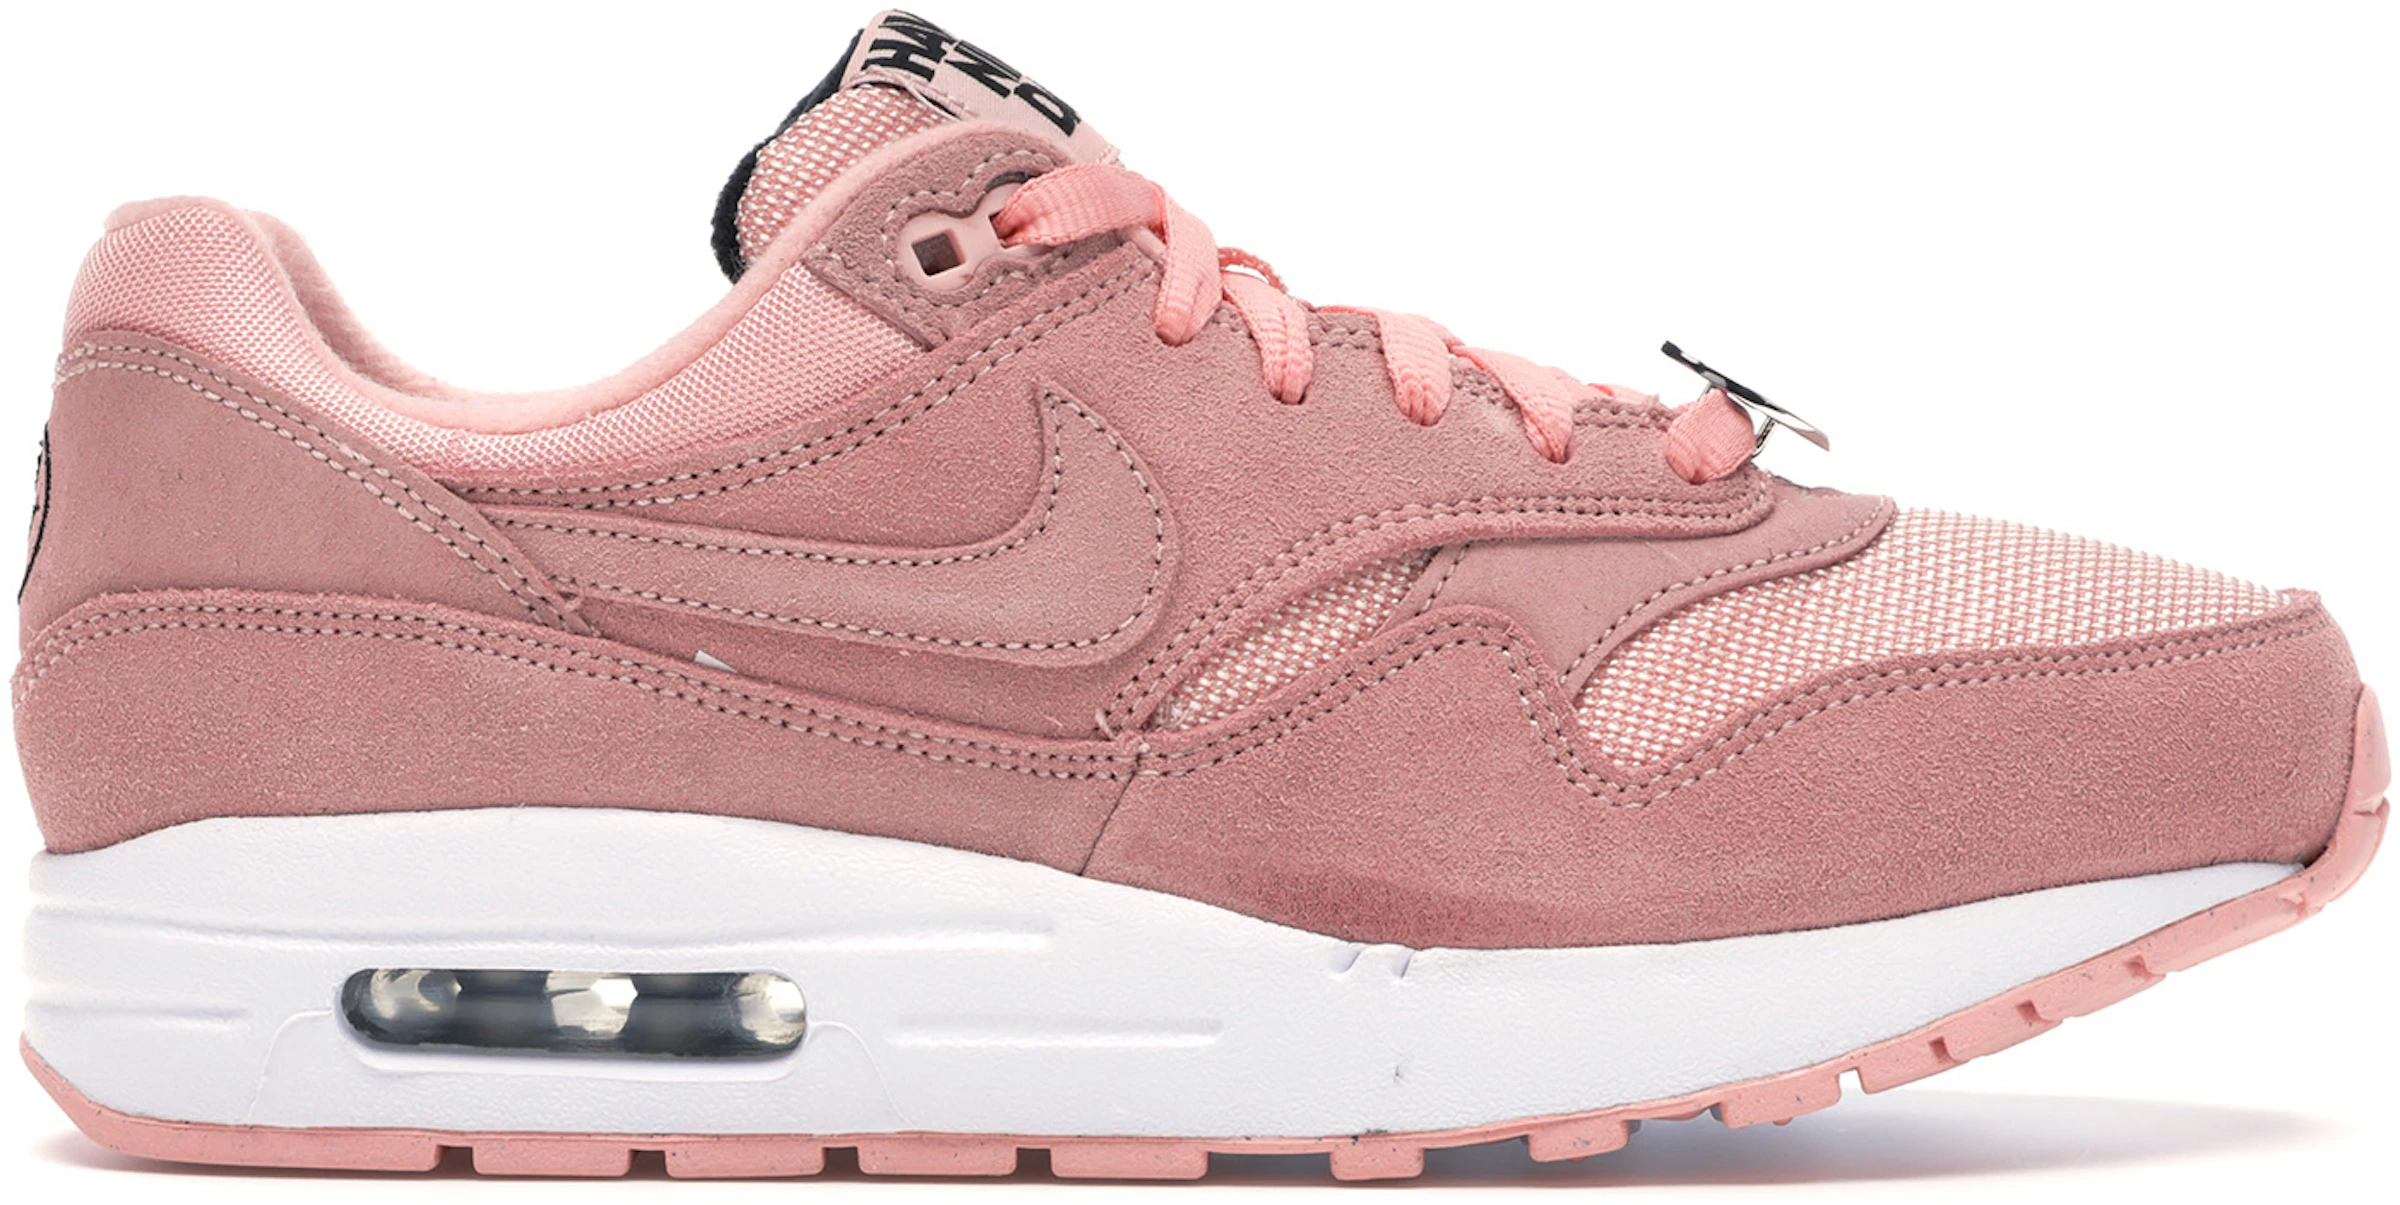 Nike Air Max 1 Have a Day Bleached (GS) - AT8131-600 - ES